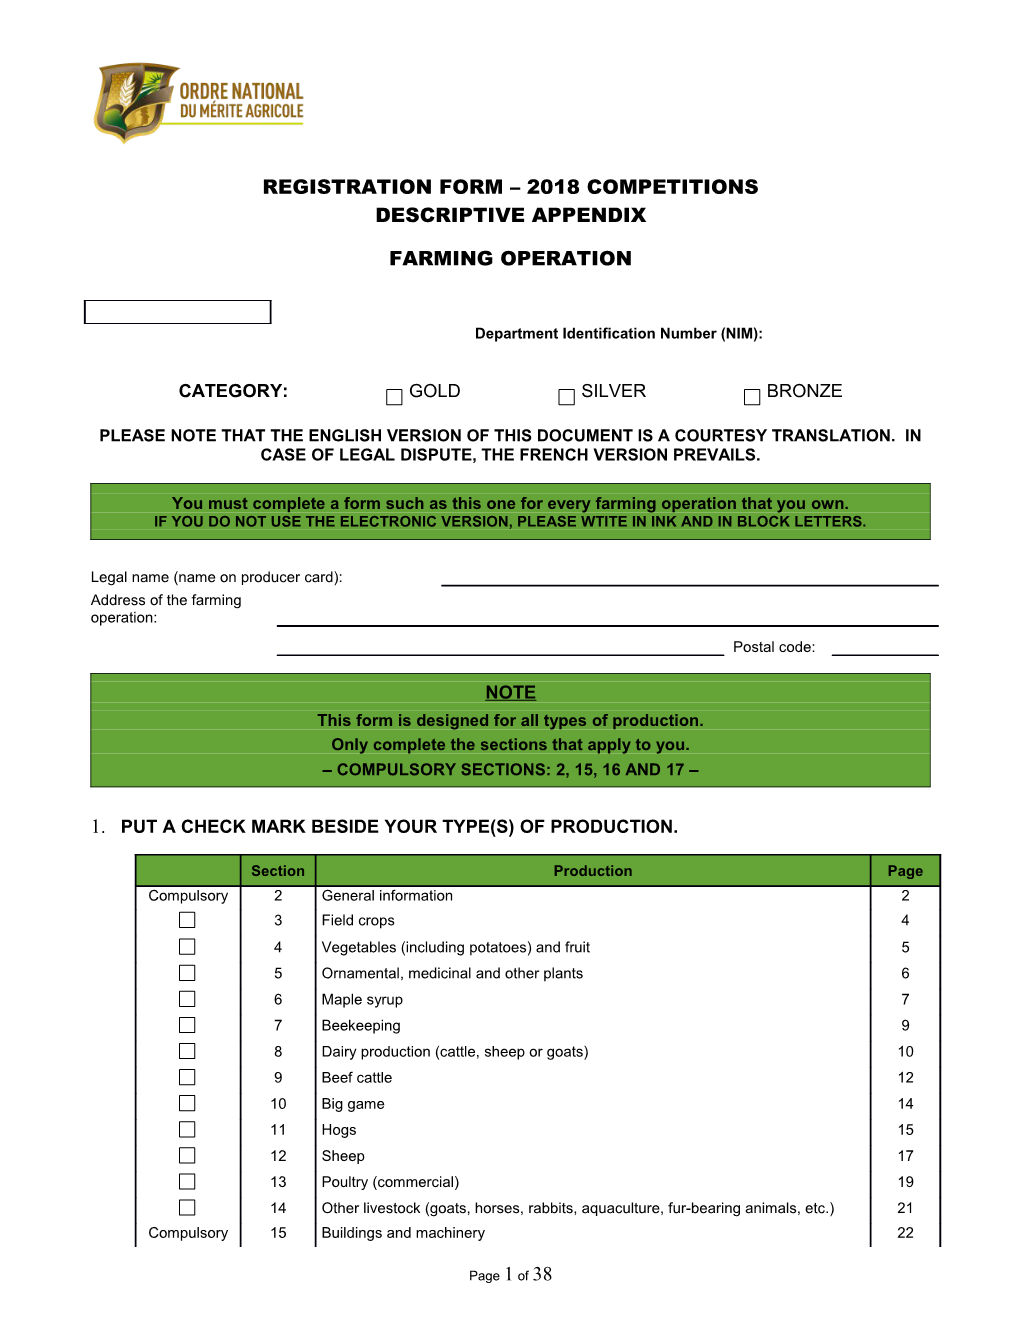 Registration Form 2018 Competitions